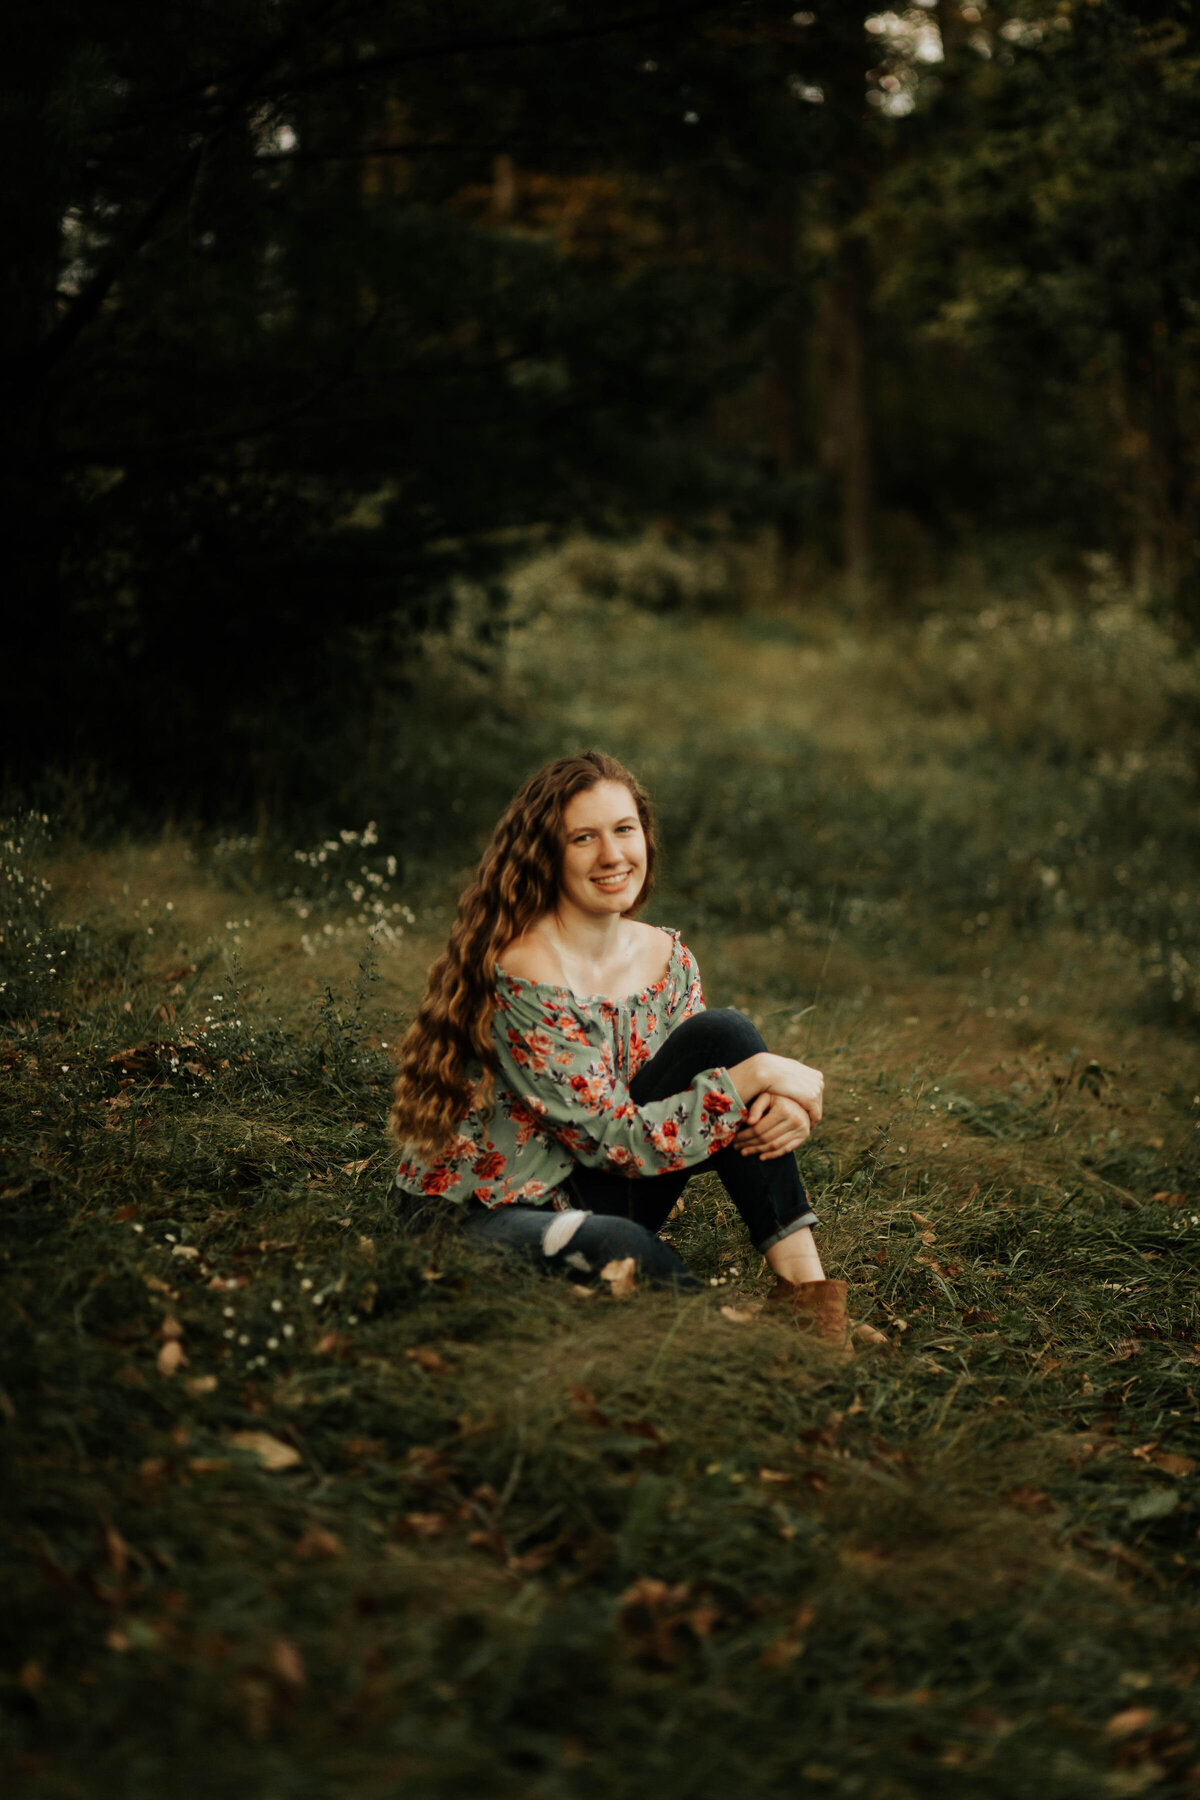 Winchester KY Senior Portraits: Capture the memories of your senior year at George Rogers Clark High School. Our expert photography will preserve this special time for you. Book your session now!